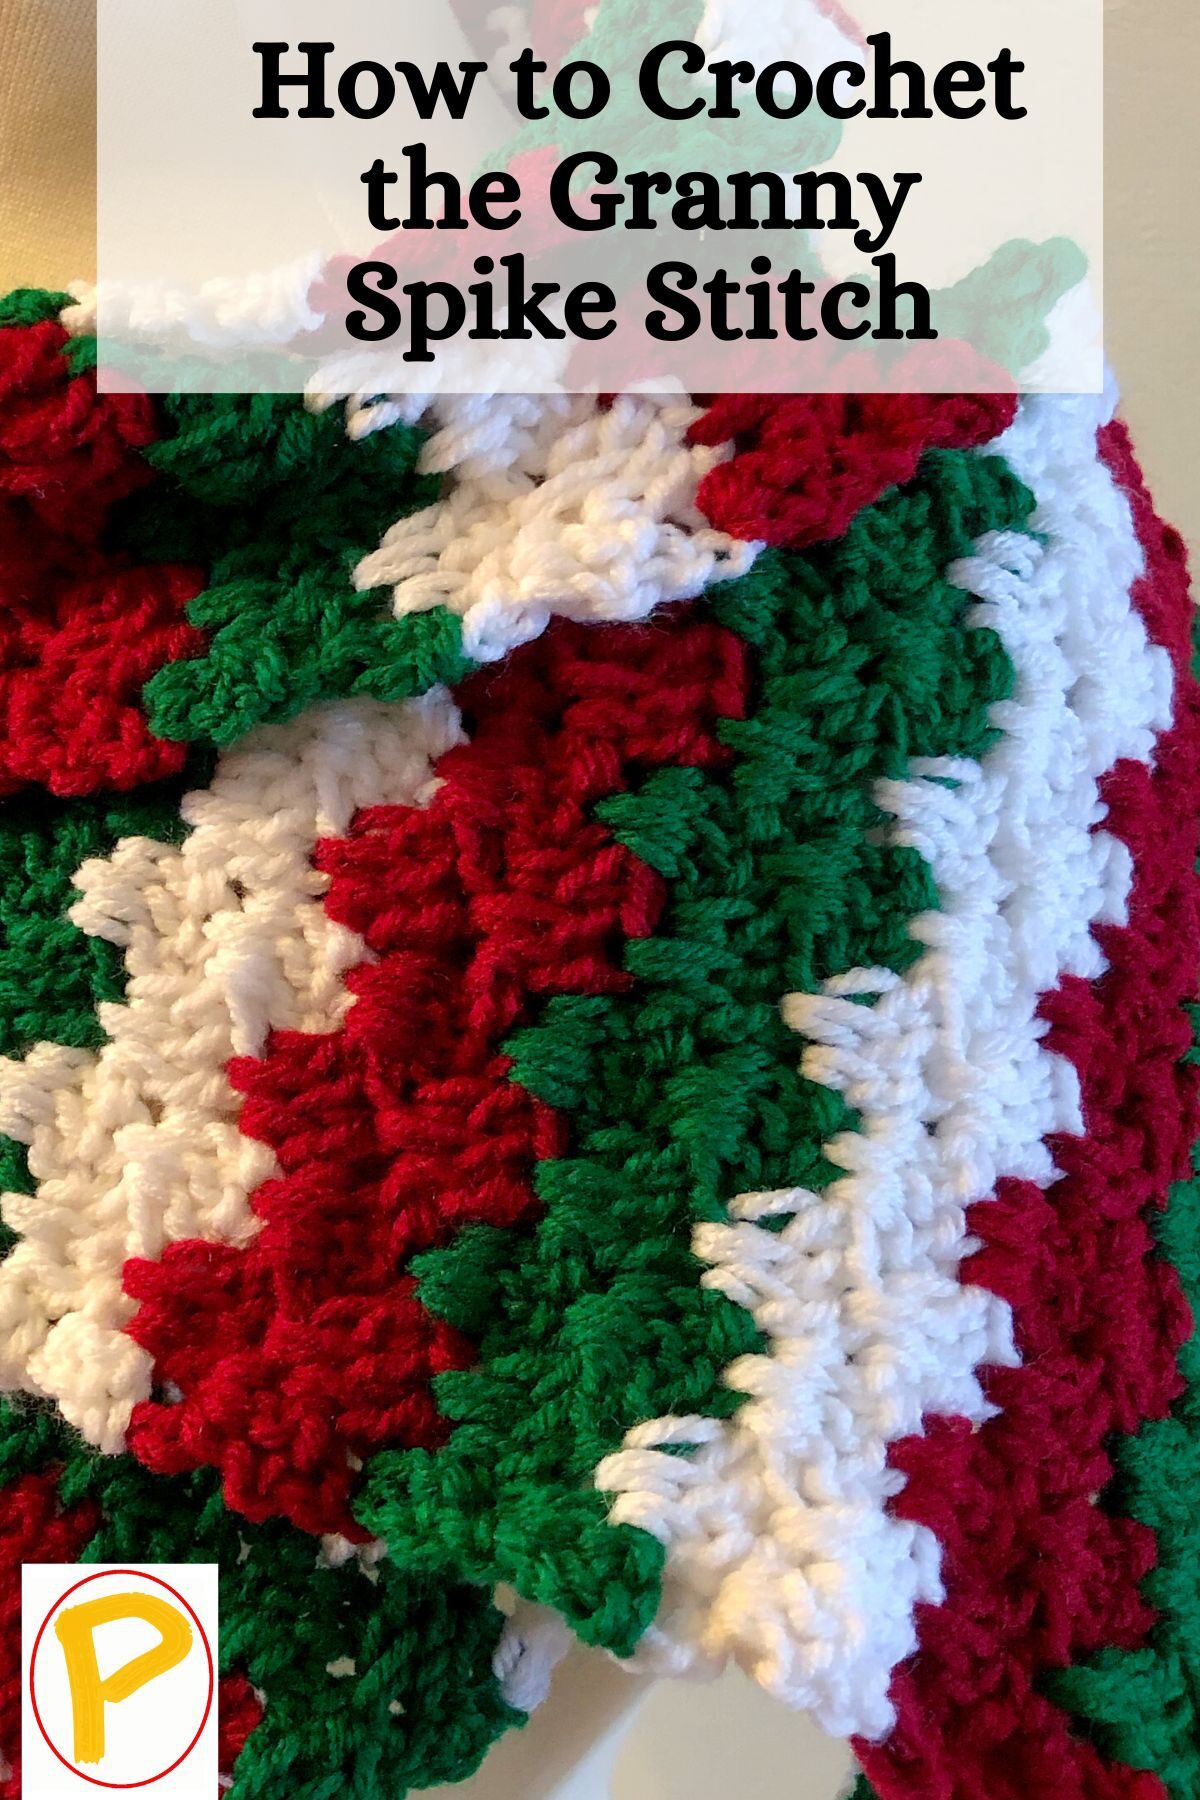 How to Crochet the Granny Spike Stitch